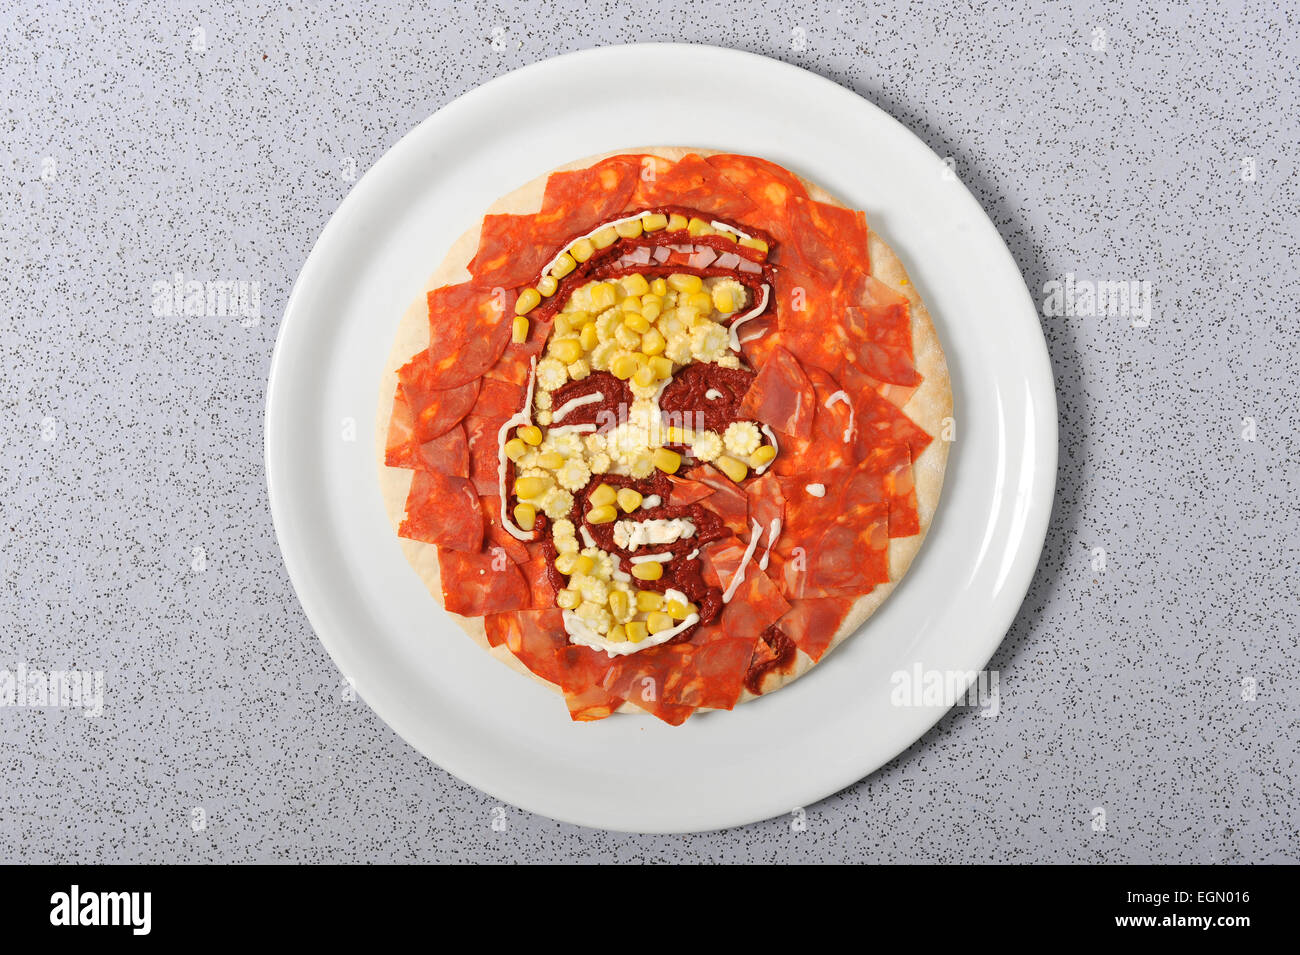 Food artist Prudence Staite has created pizzas of famous faces. Stock Photo